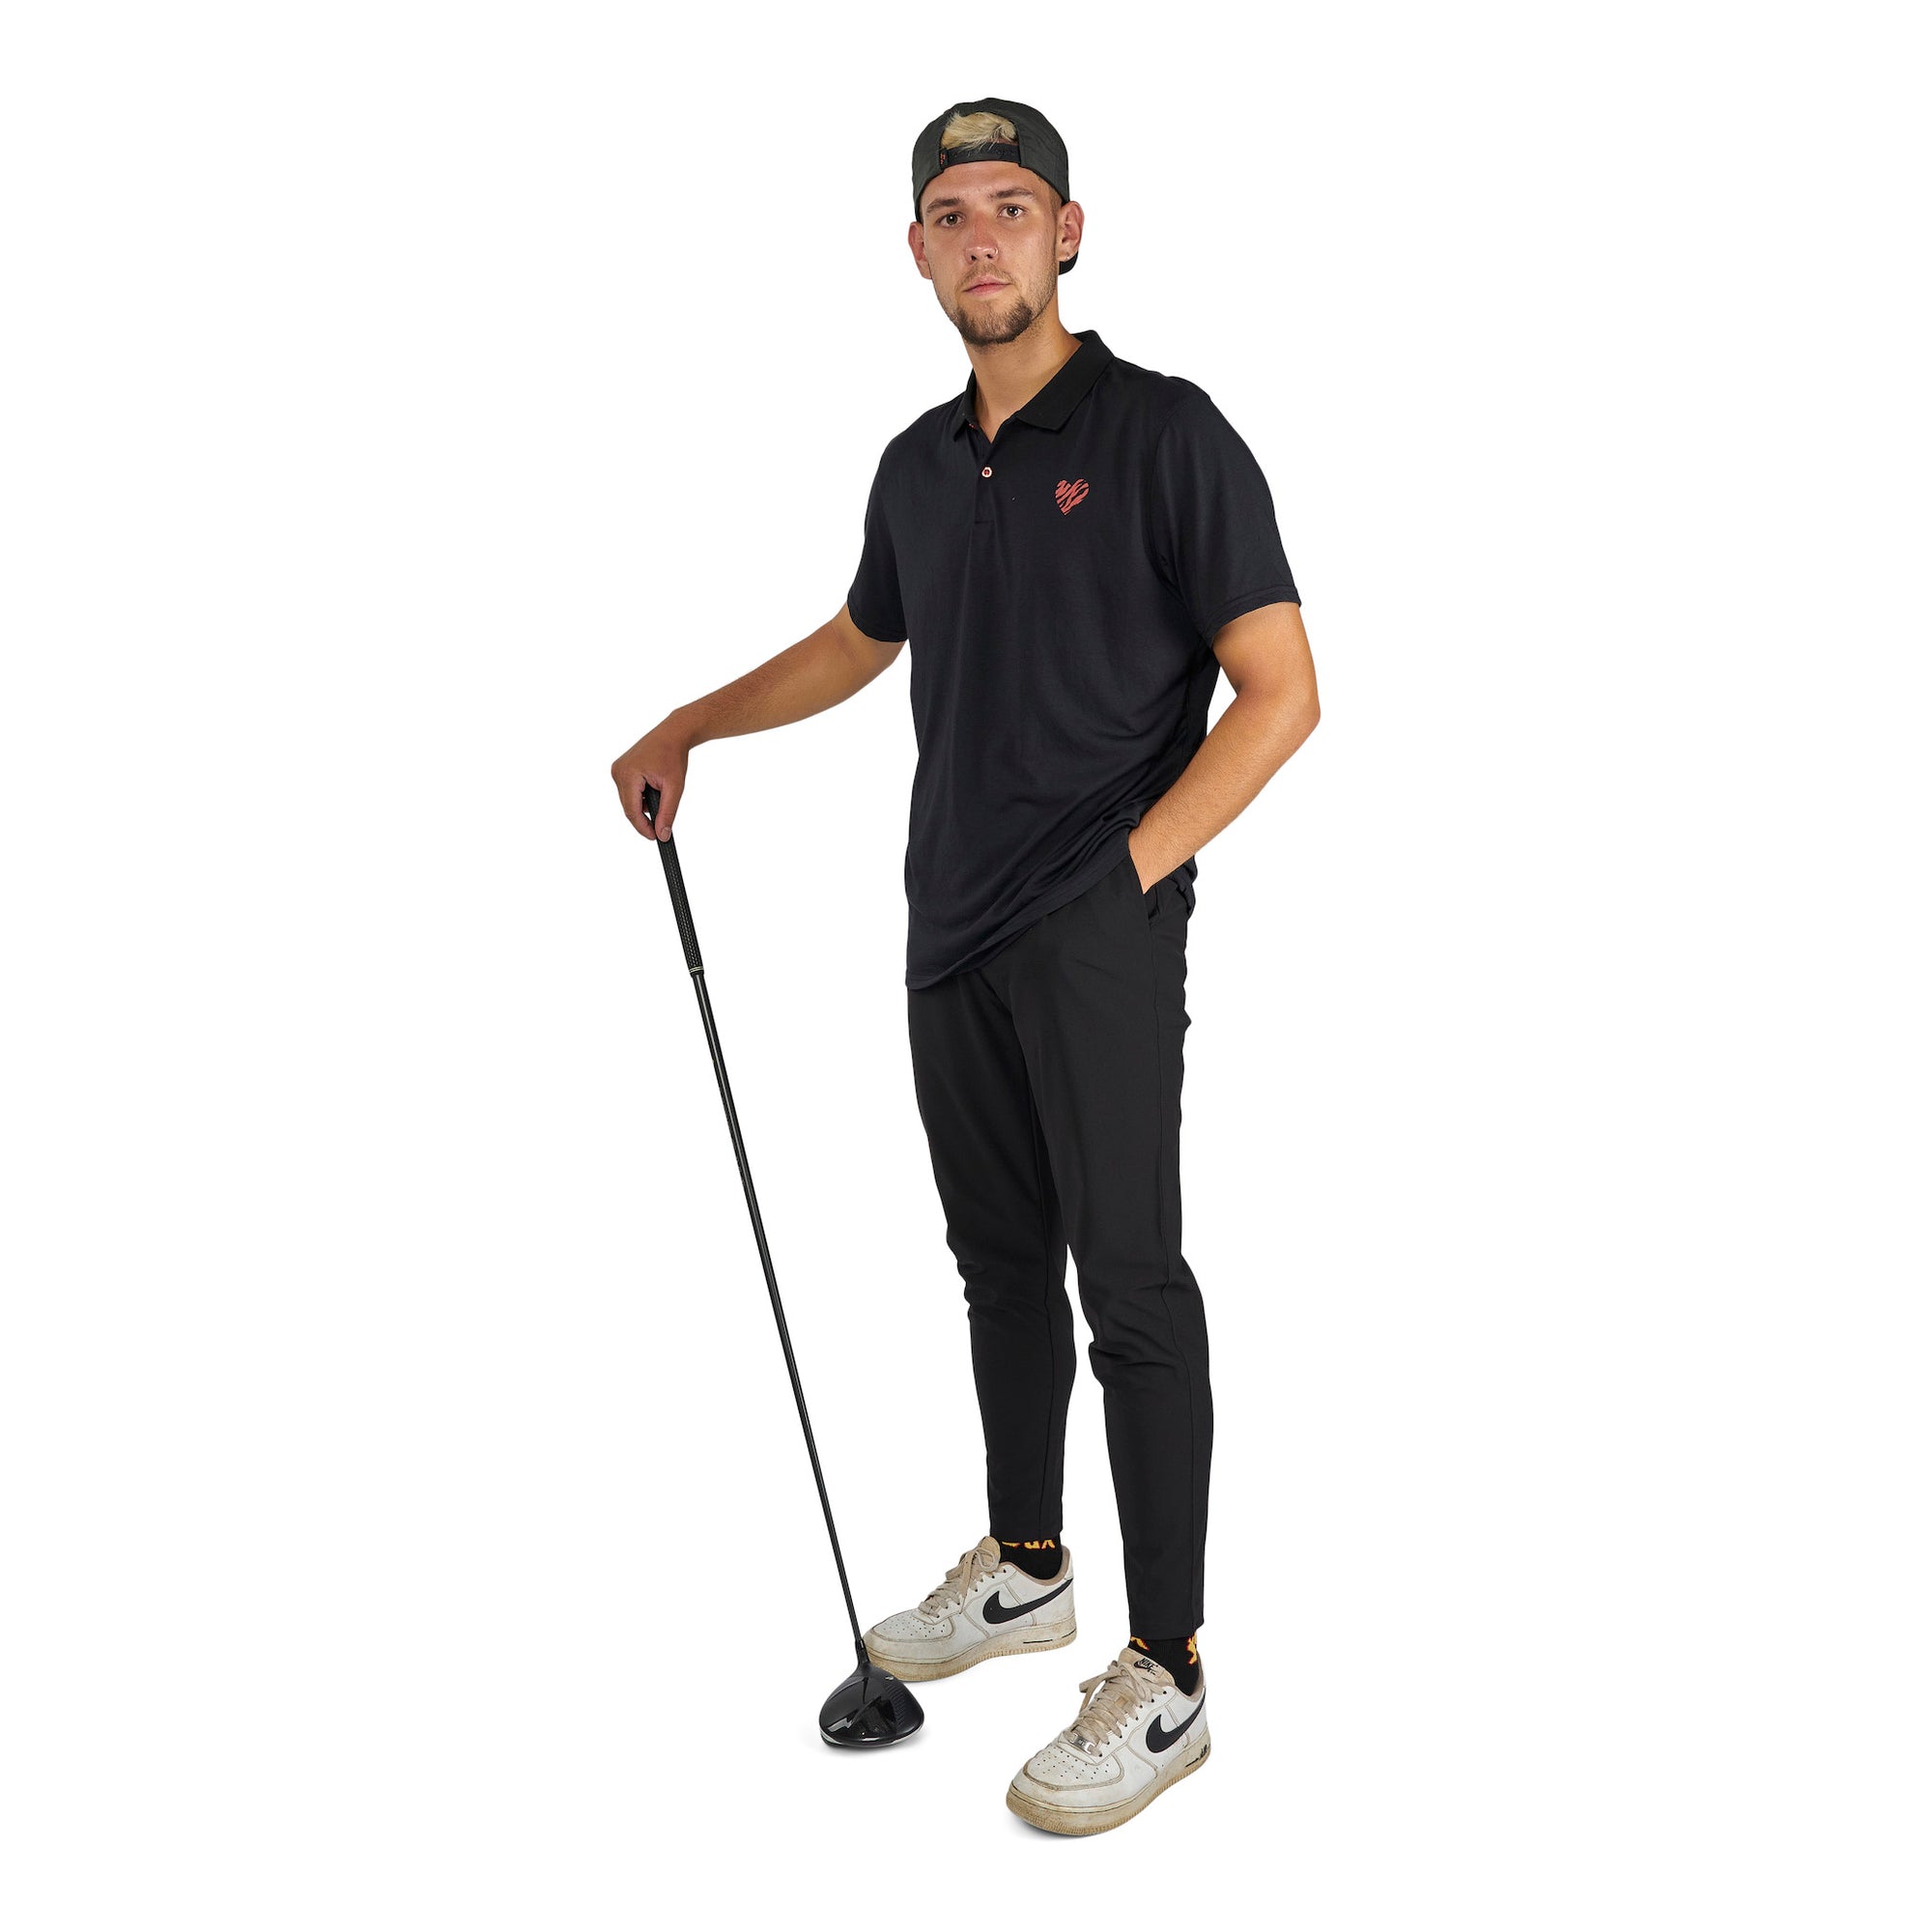 This red and black tiger heart golf polo by Birds of Condor is from our 2022 drirelease polo collection.  Super premium feel and fit, cools and drys your skin fast, no sweat.  The subtle tiger print is a nod to the champ.